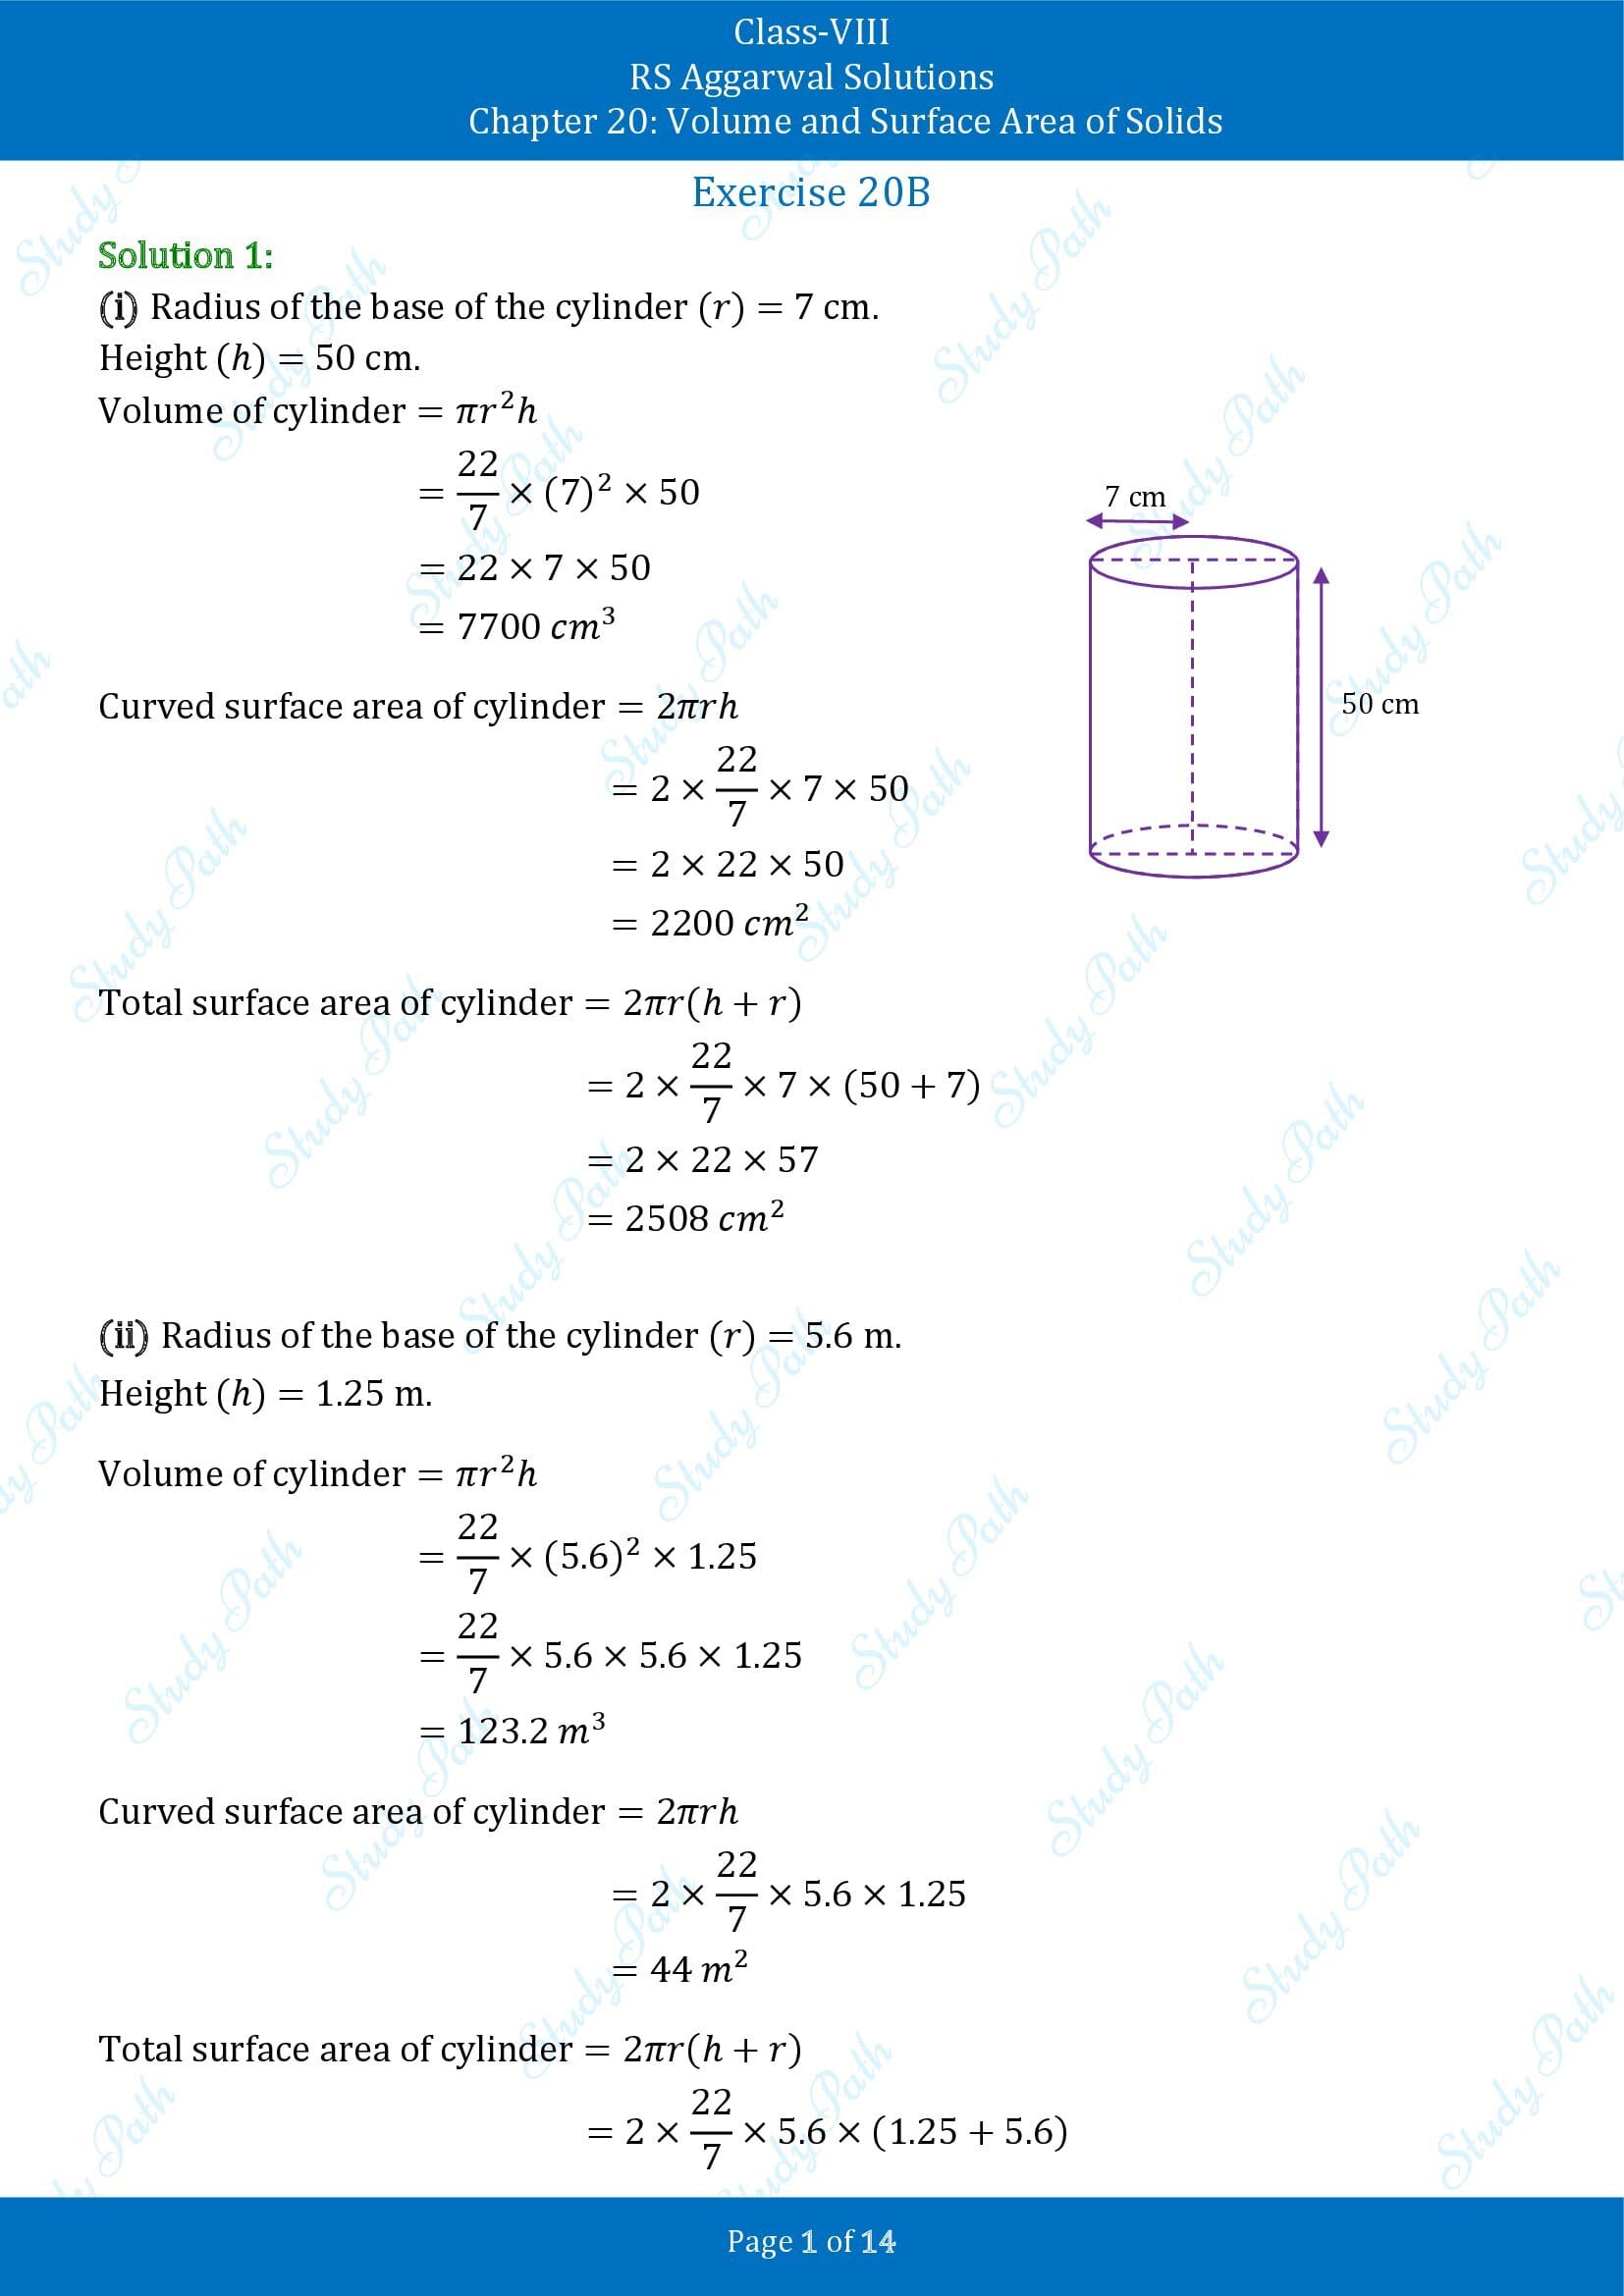 RS Aggarwal Solutions Class 8 Chapter 20 Volume and Surface Area of Solids Exercise 20B 00001